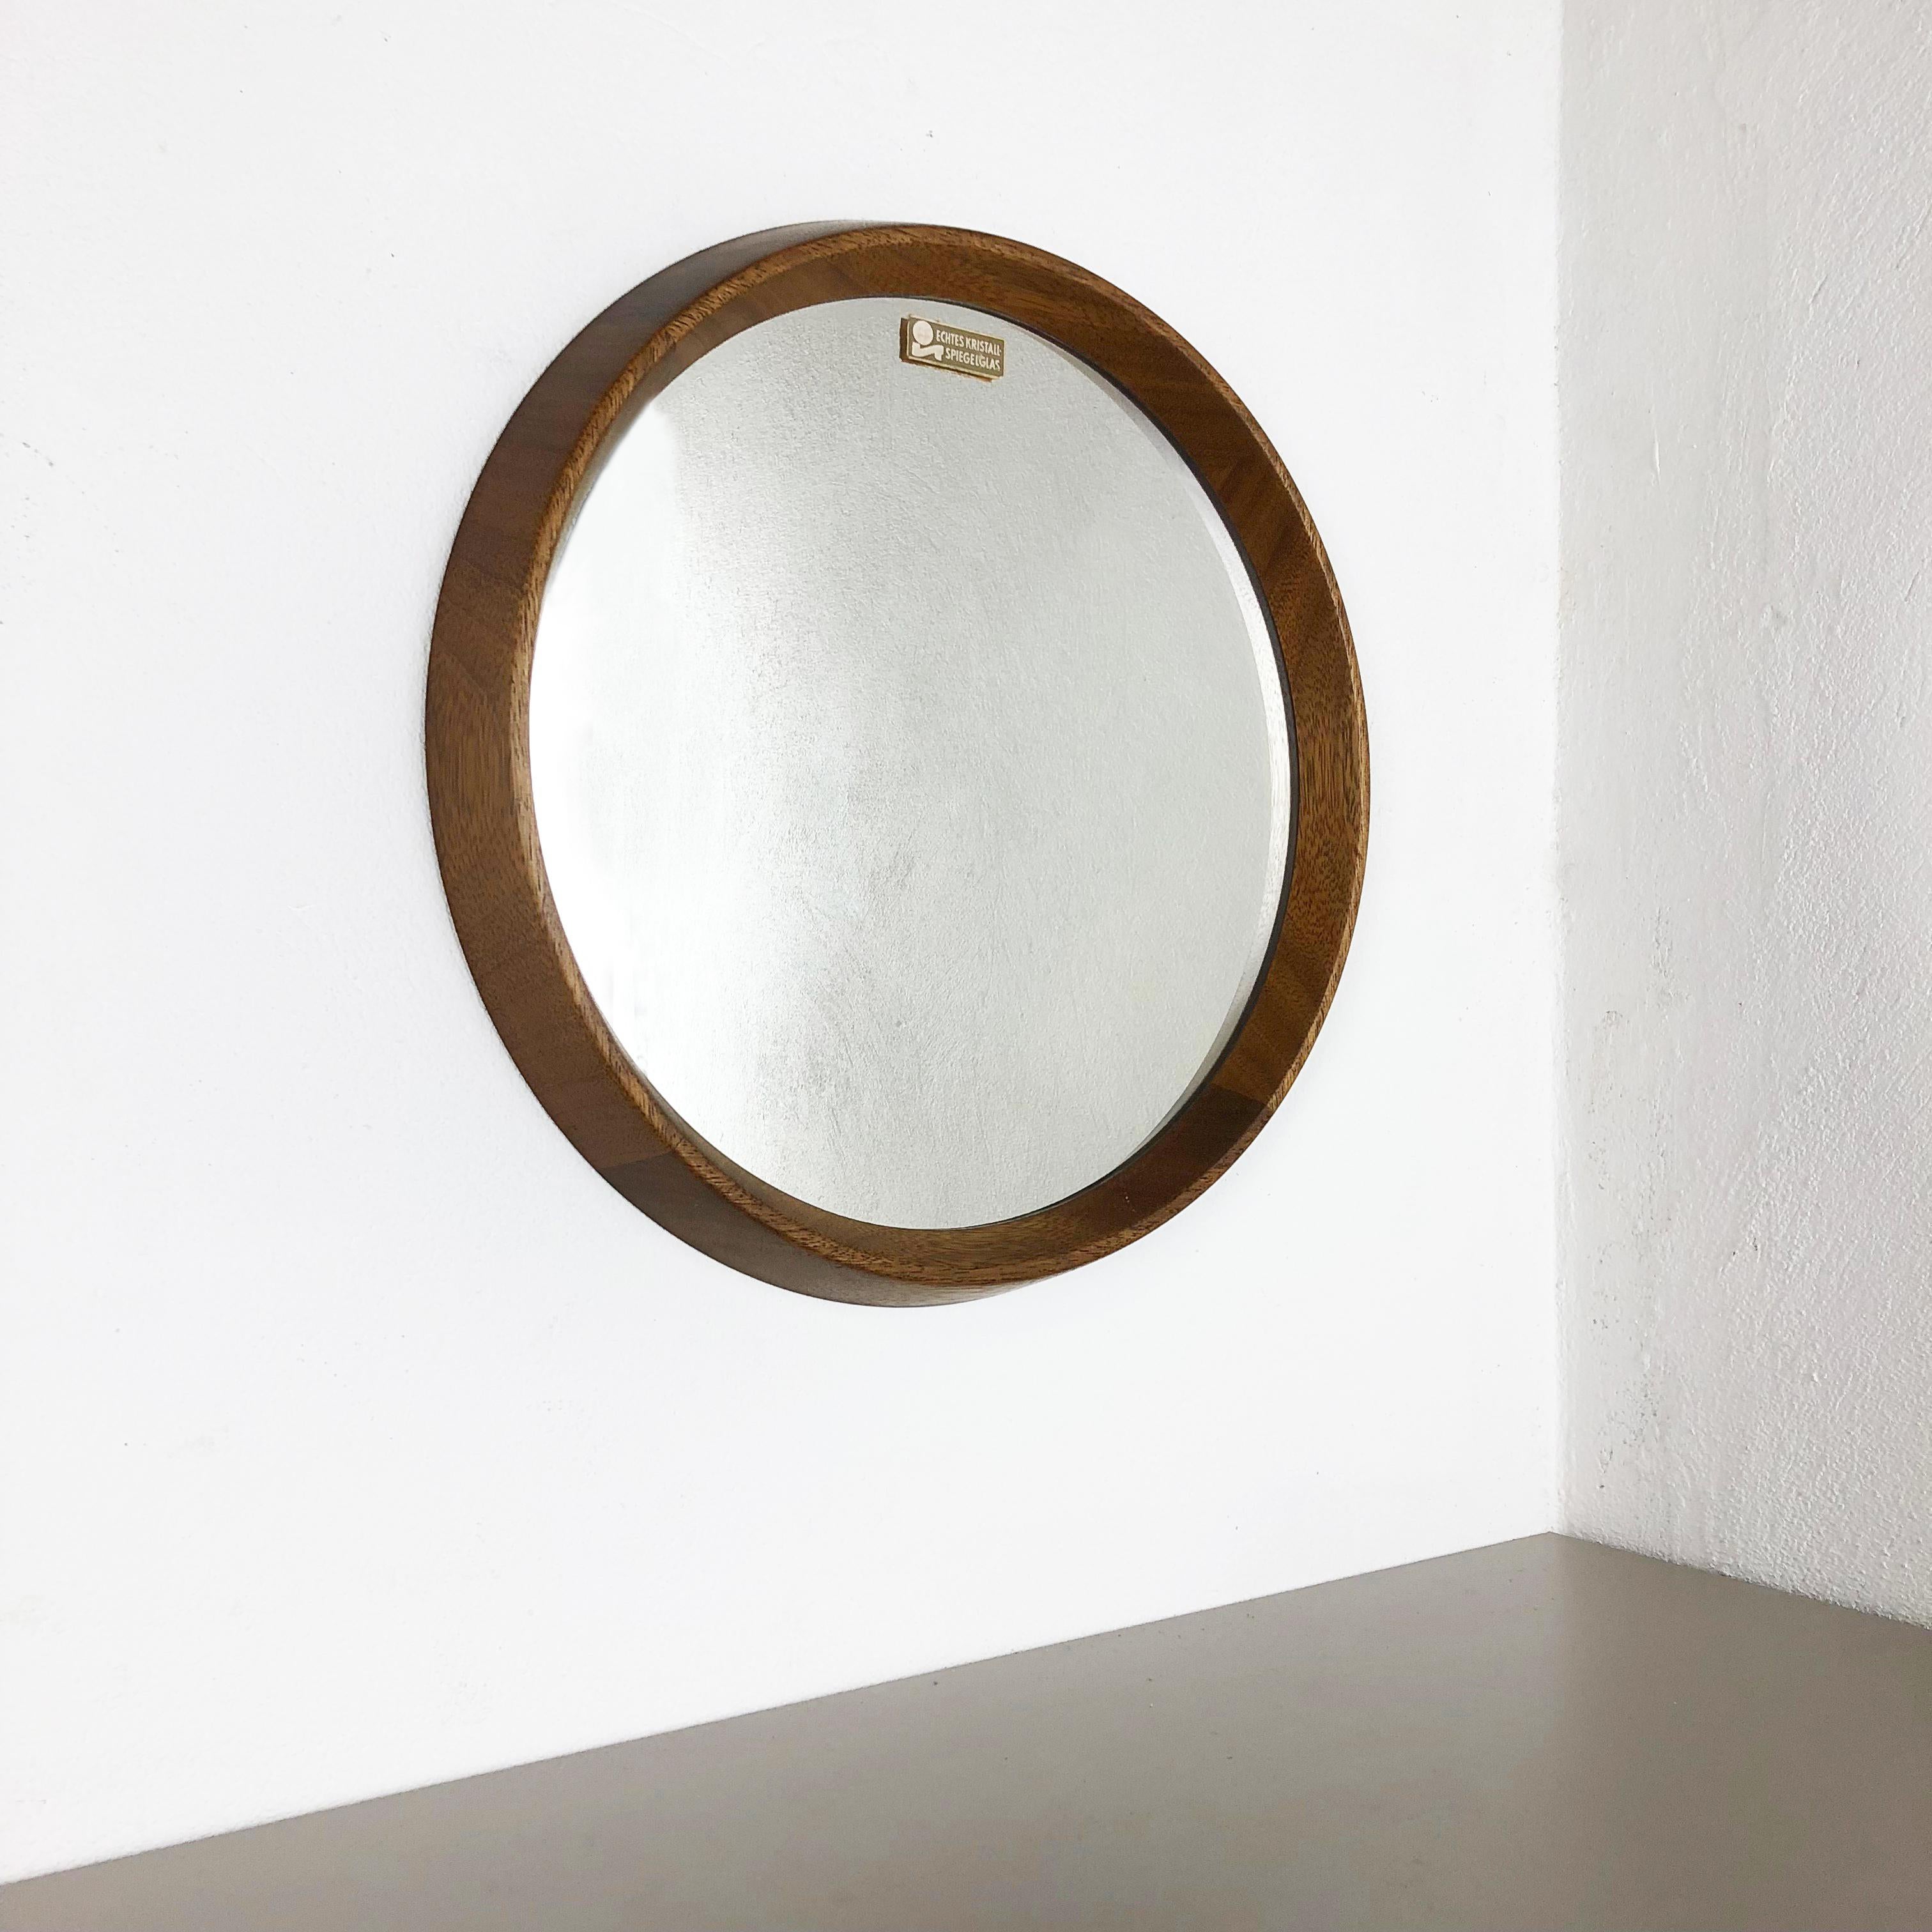 Article:

solid wood mirror new old stock!


Origin:

Germany


Age:

1960s


Description:

this original vintage solid wood mirror was produced in the 1960s in Germany. it is new old stock, it was stored in a shop since the 1960s,